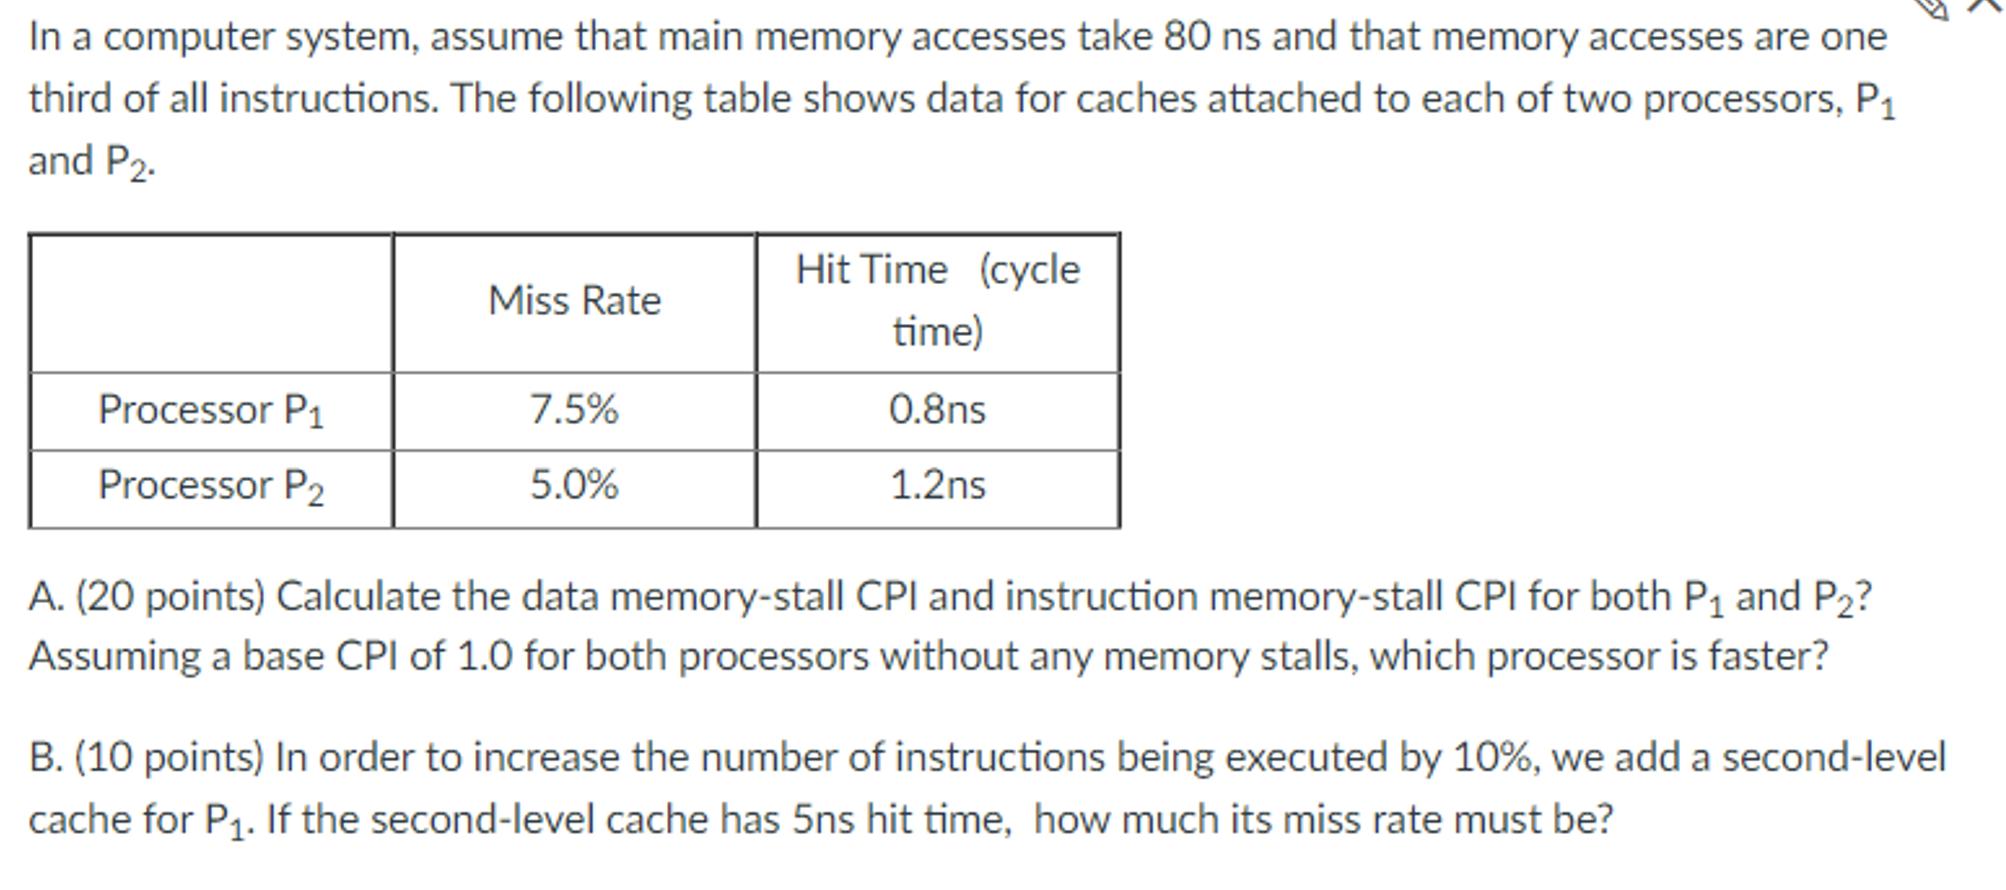 In a computer system, assume that main memory accesses take 80 ns and that memory accesses are one third of